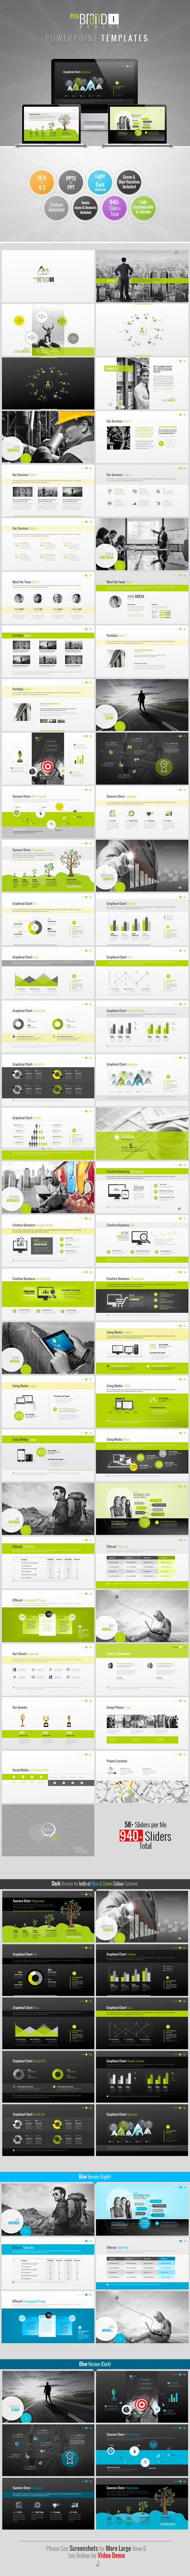 ProBrand PowerPoint Templates - Creative Powerpoint Templates